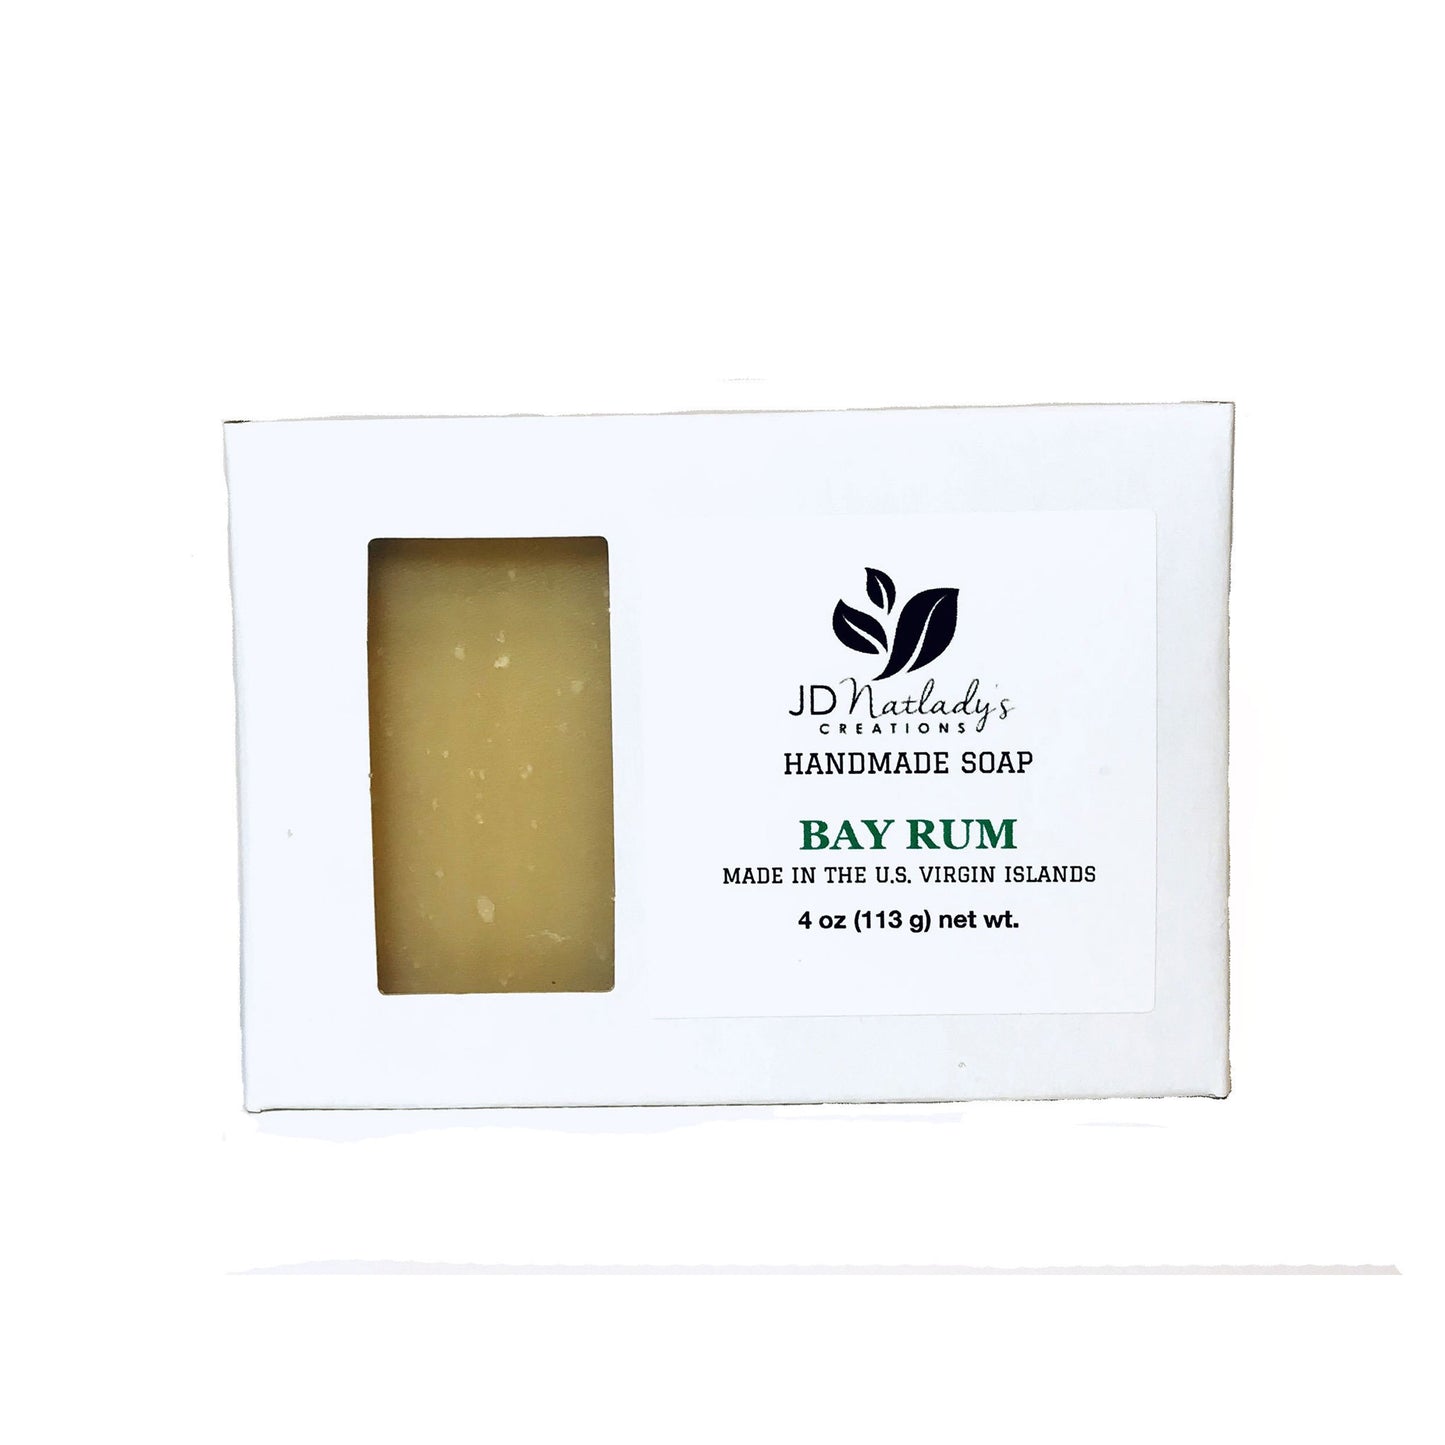 Bay Rum Soap by JDNatlady's Creations of St. Thomas, Virgin Islands